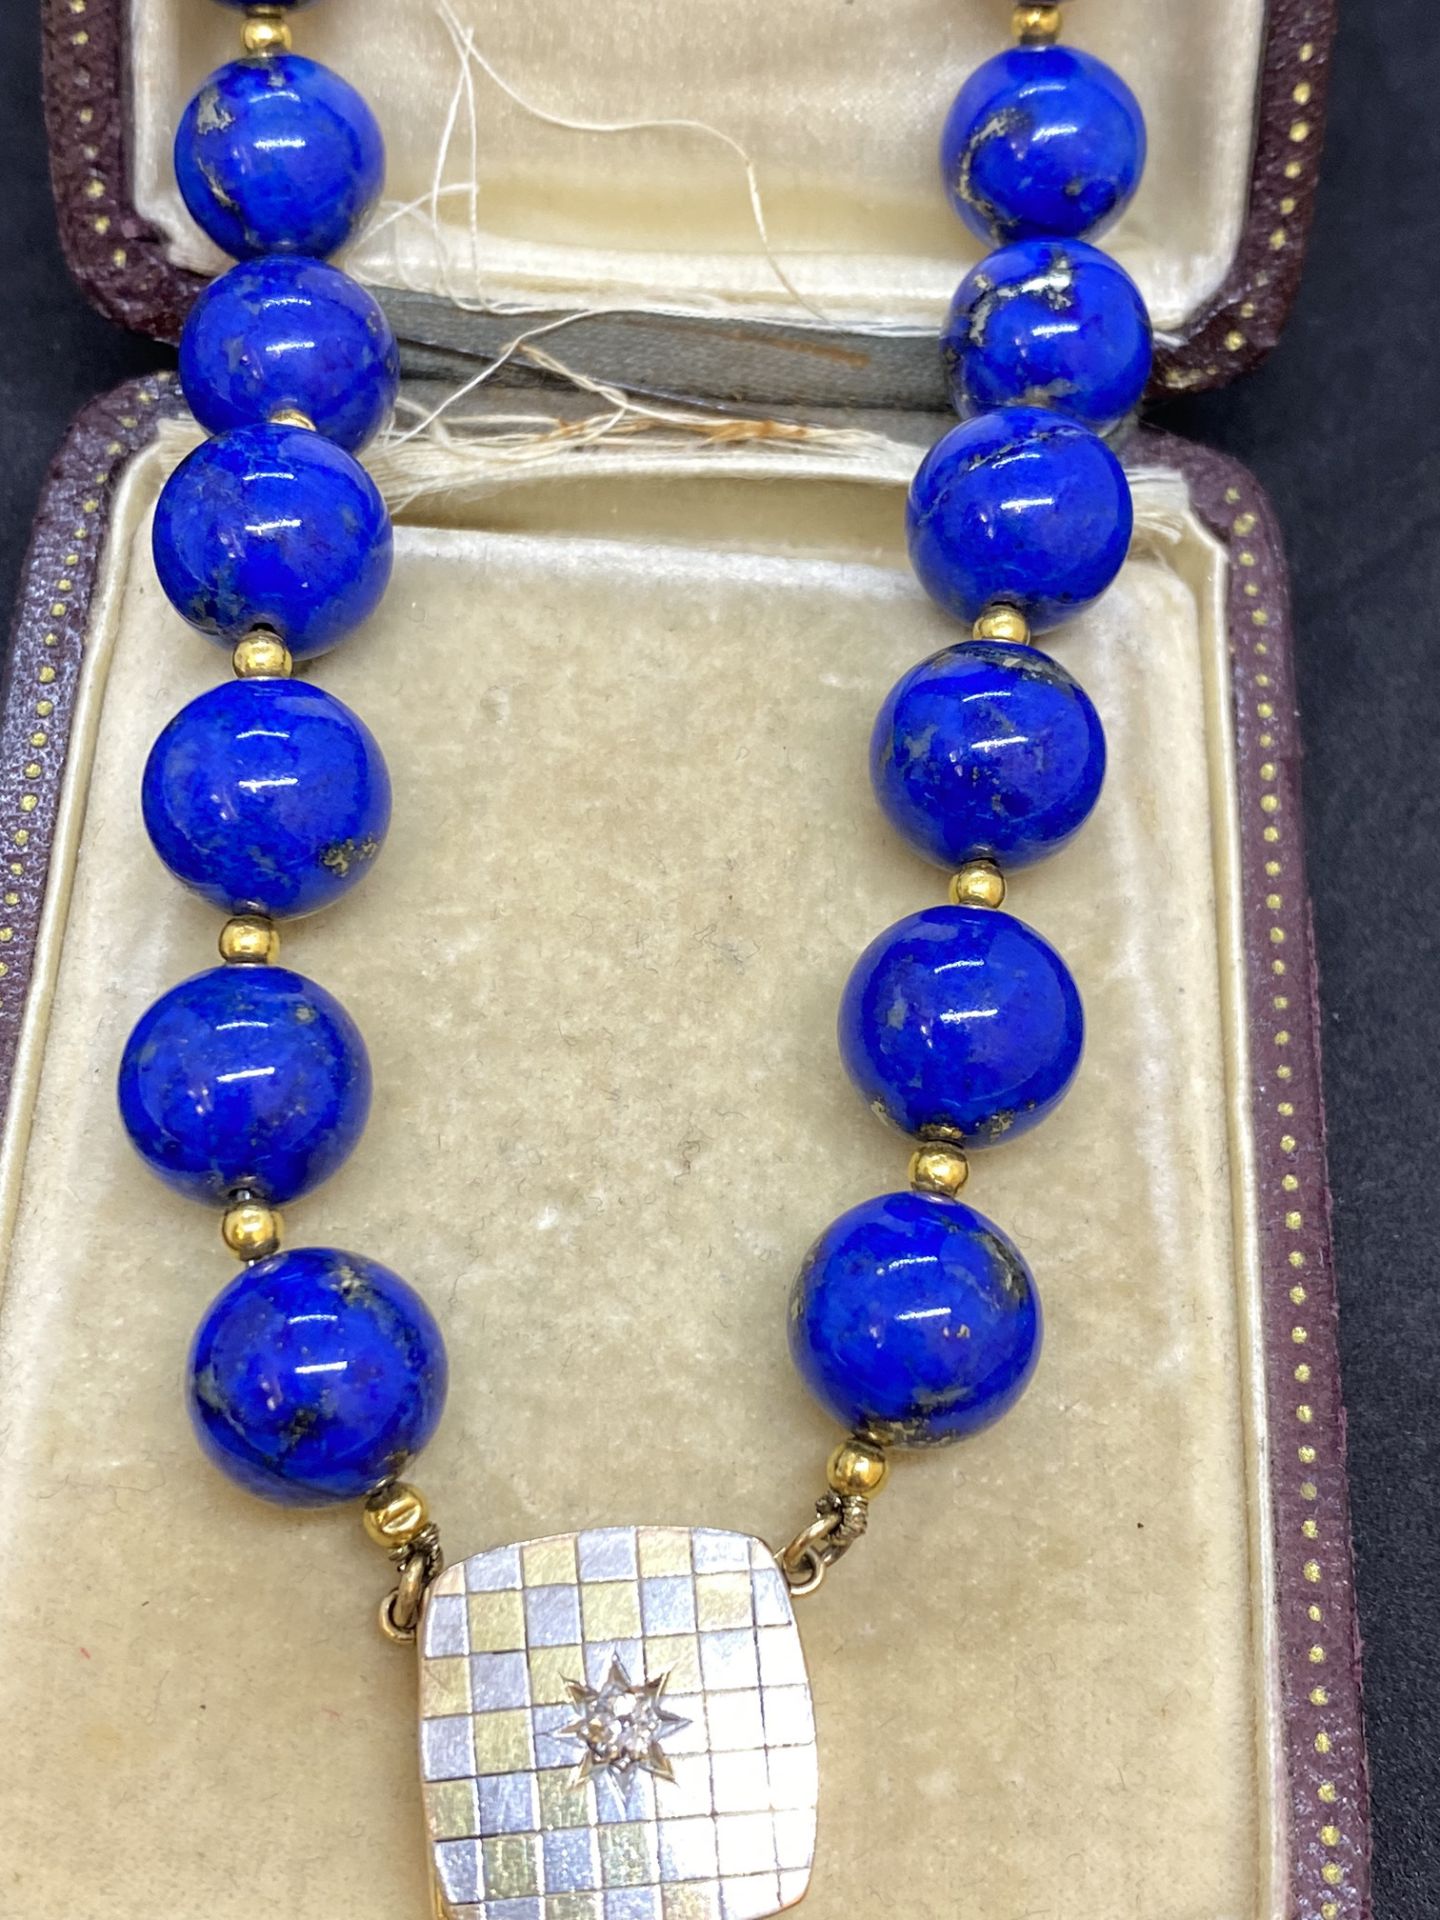 18ct GOLD LAPIS NECKLACE 76 GRAMS - Image 2 of 6